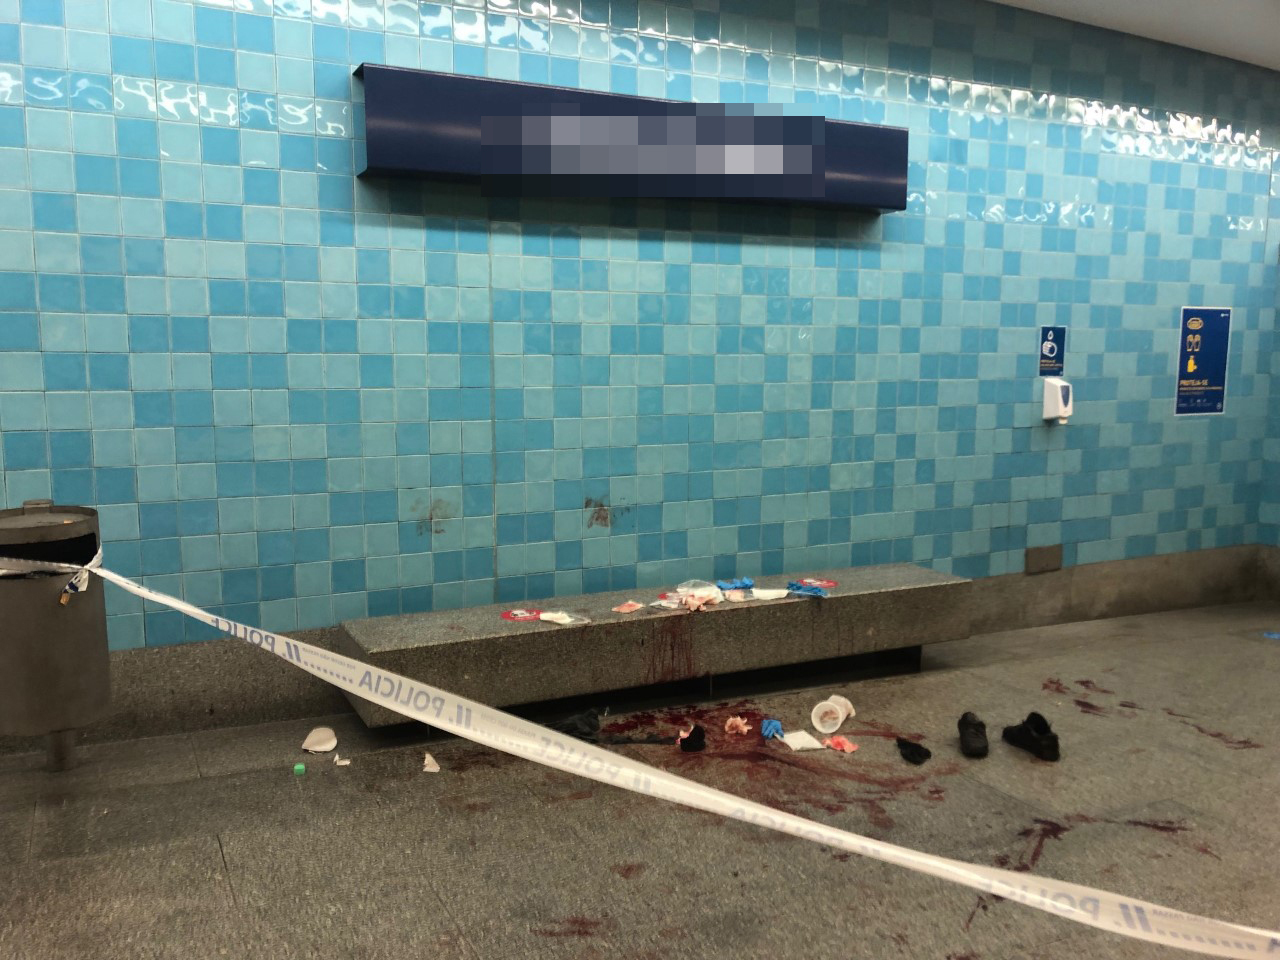 45-year-old-man stabbed in the subway